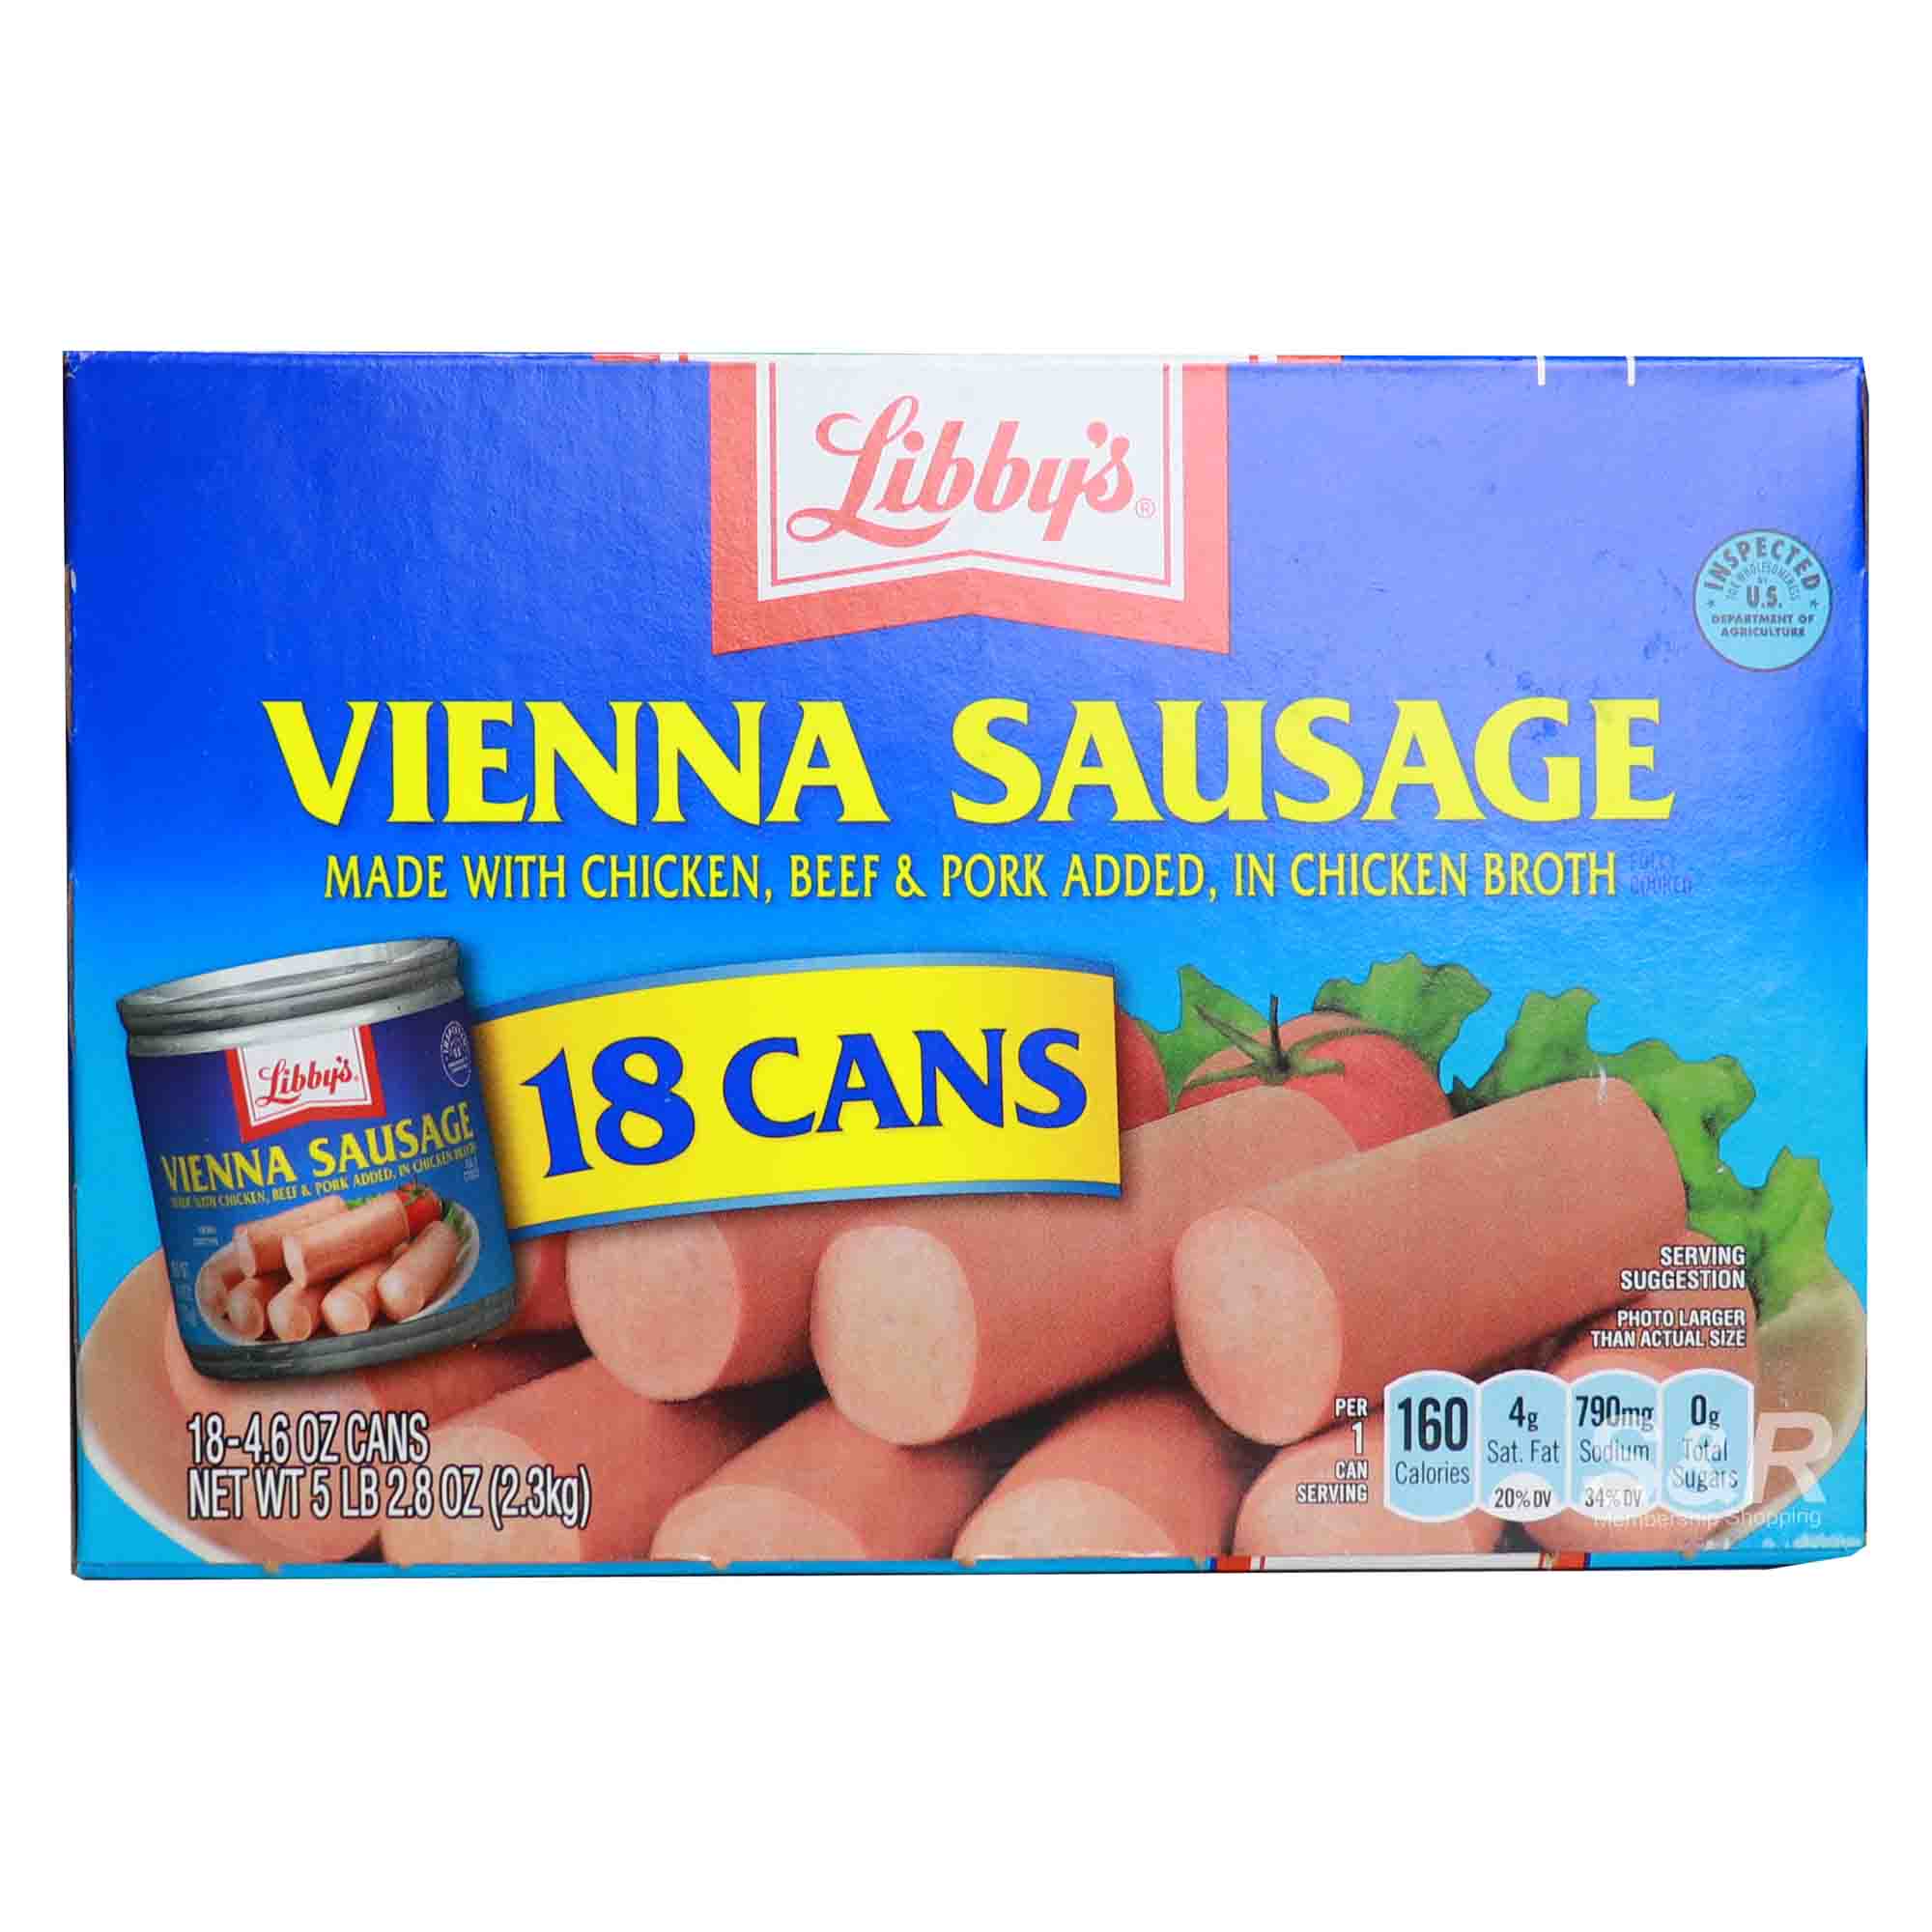 Libby's Vienna Sausage 18 cans